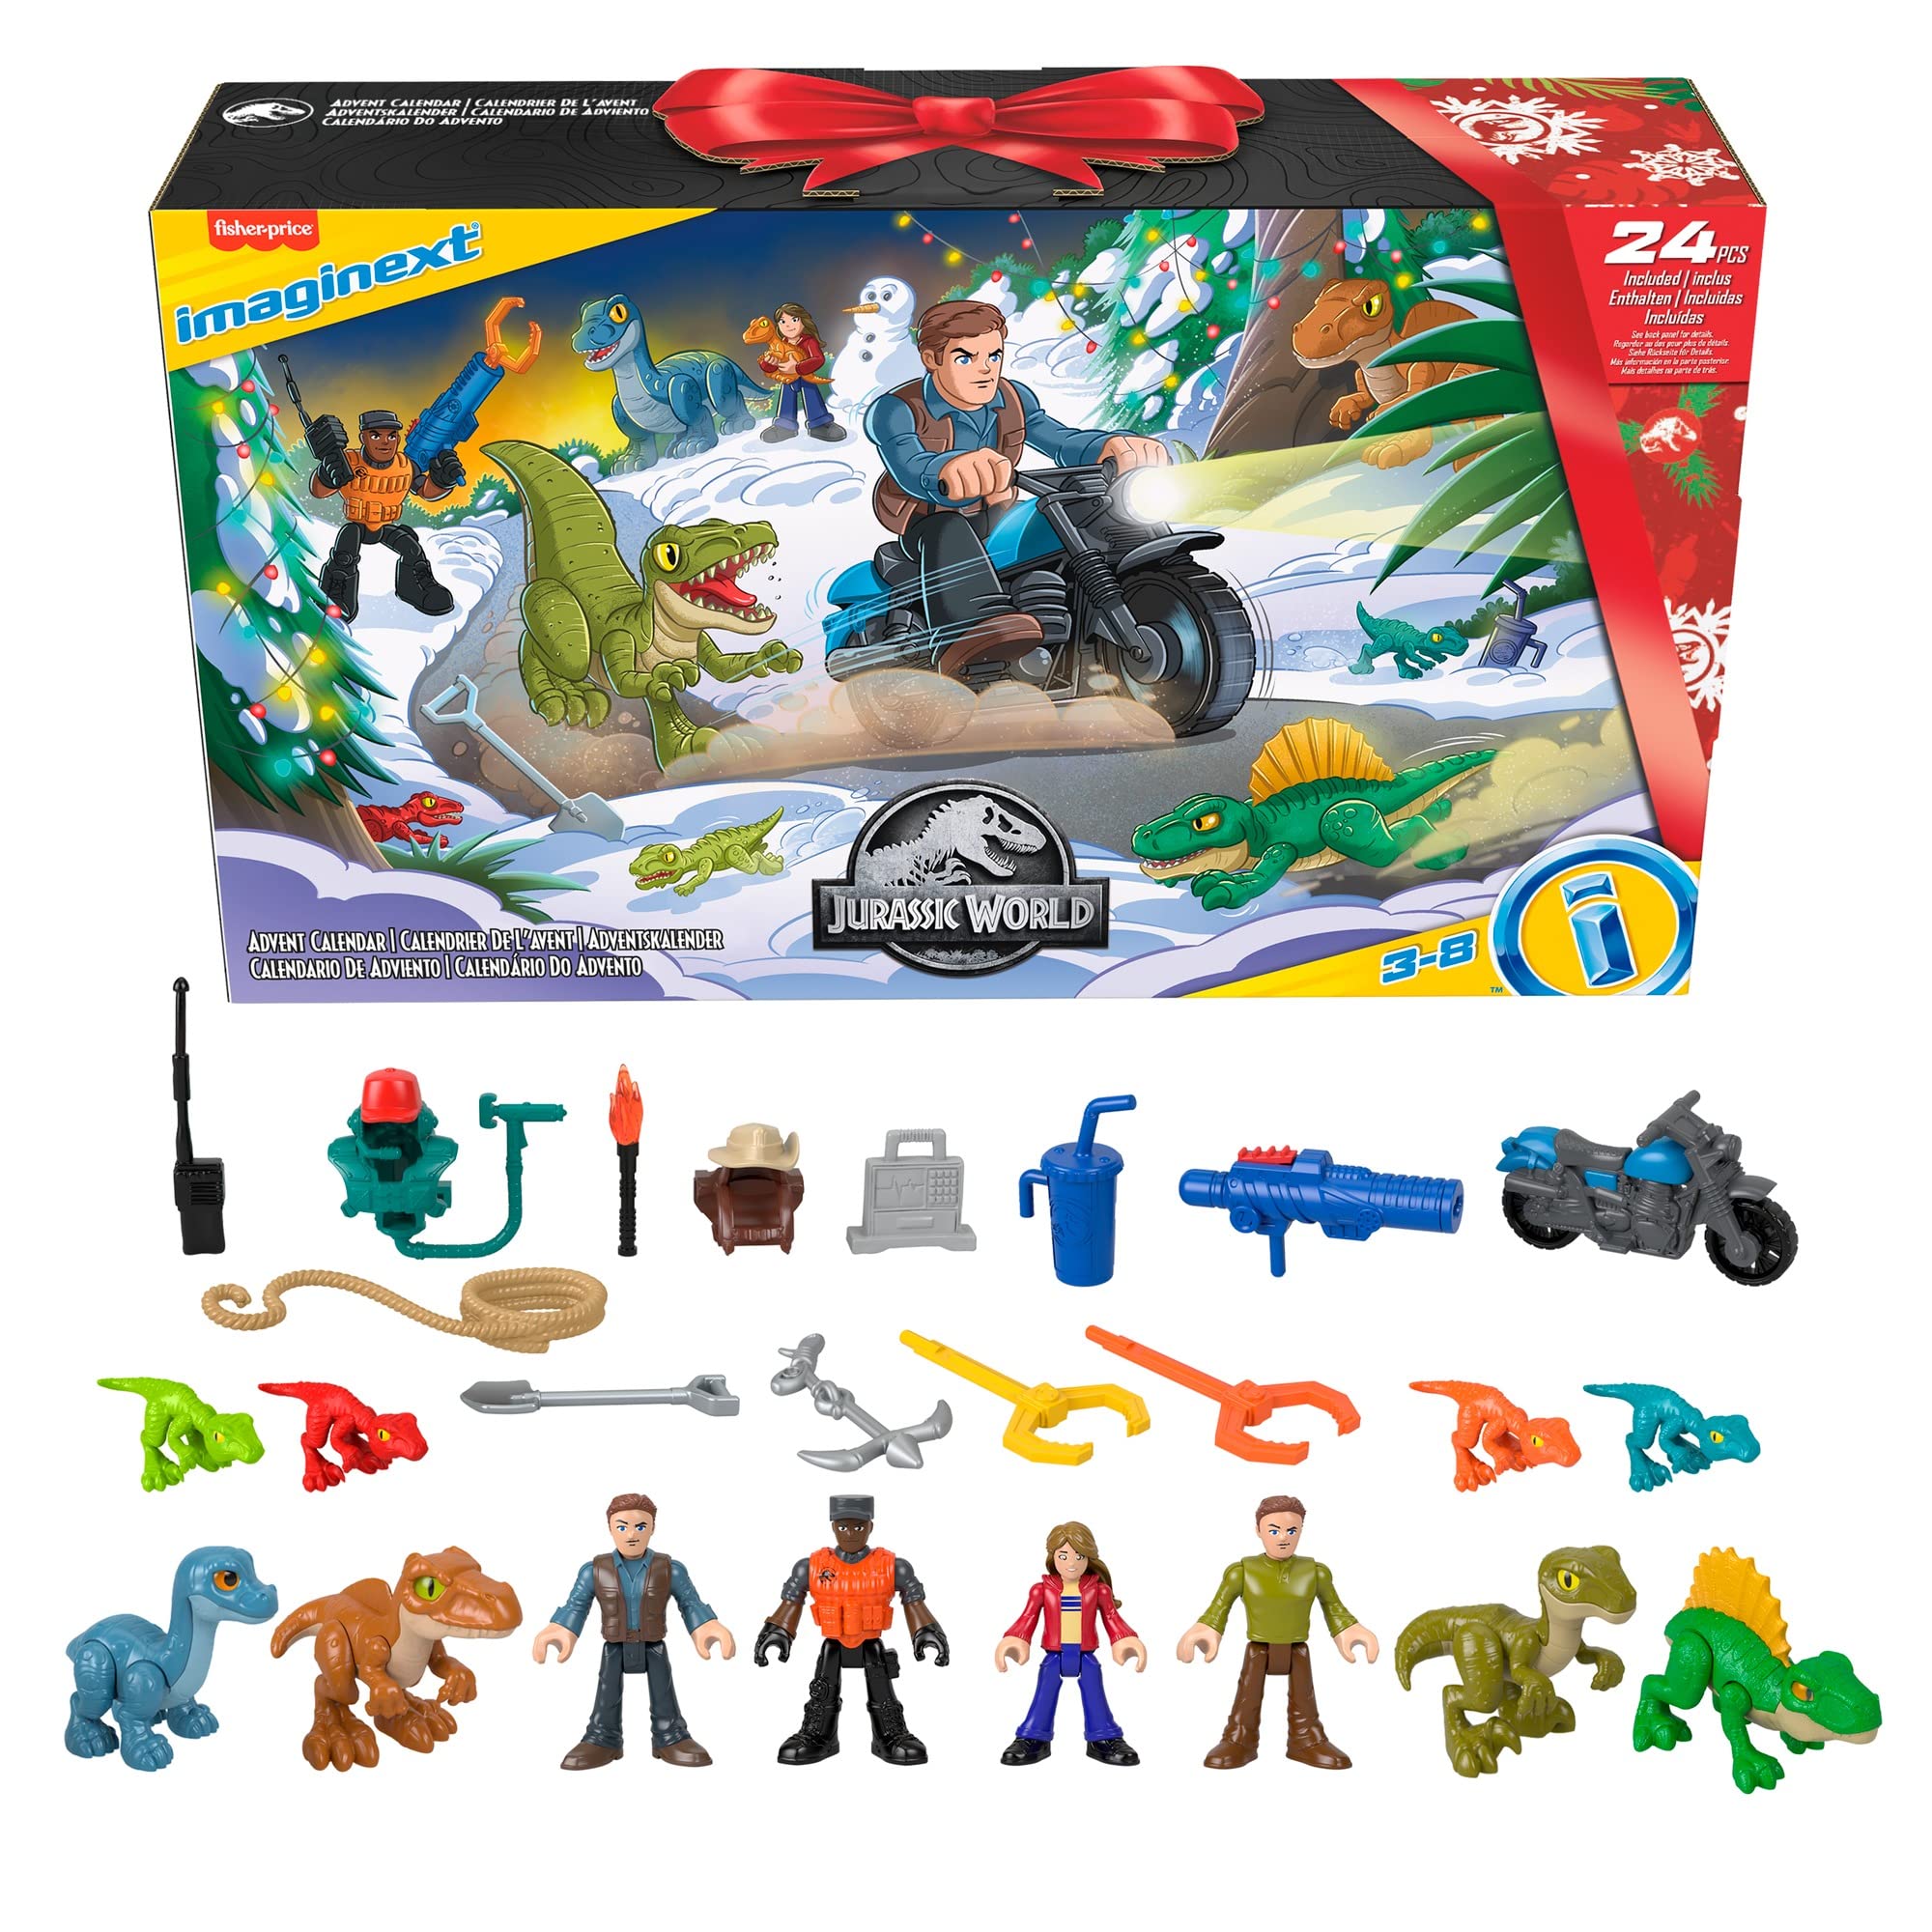 25-Piece Fisher-Price Imaginext Jurassic World Advent Calendar $14.50 + Free Shipping w/ Prime or on $35+